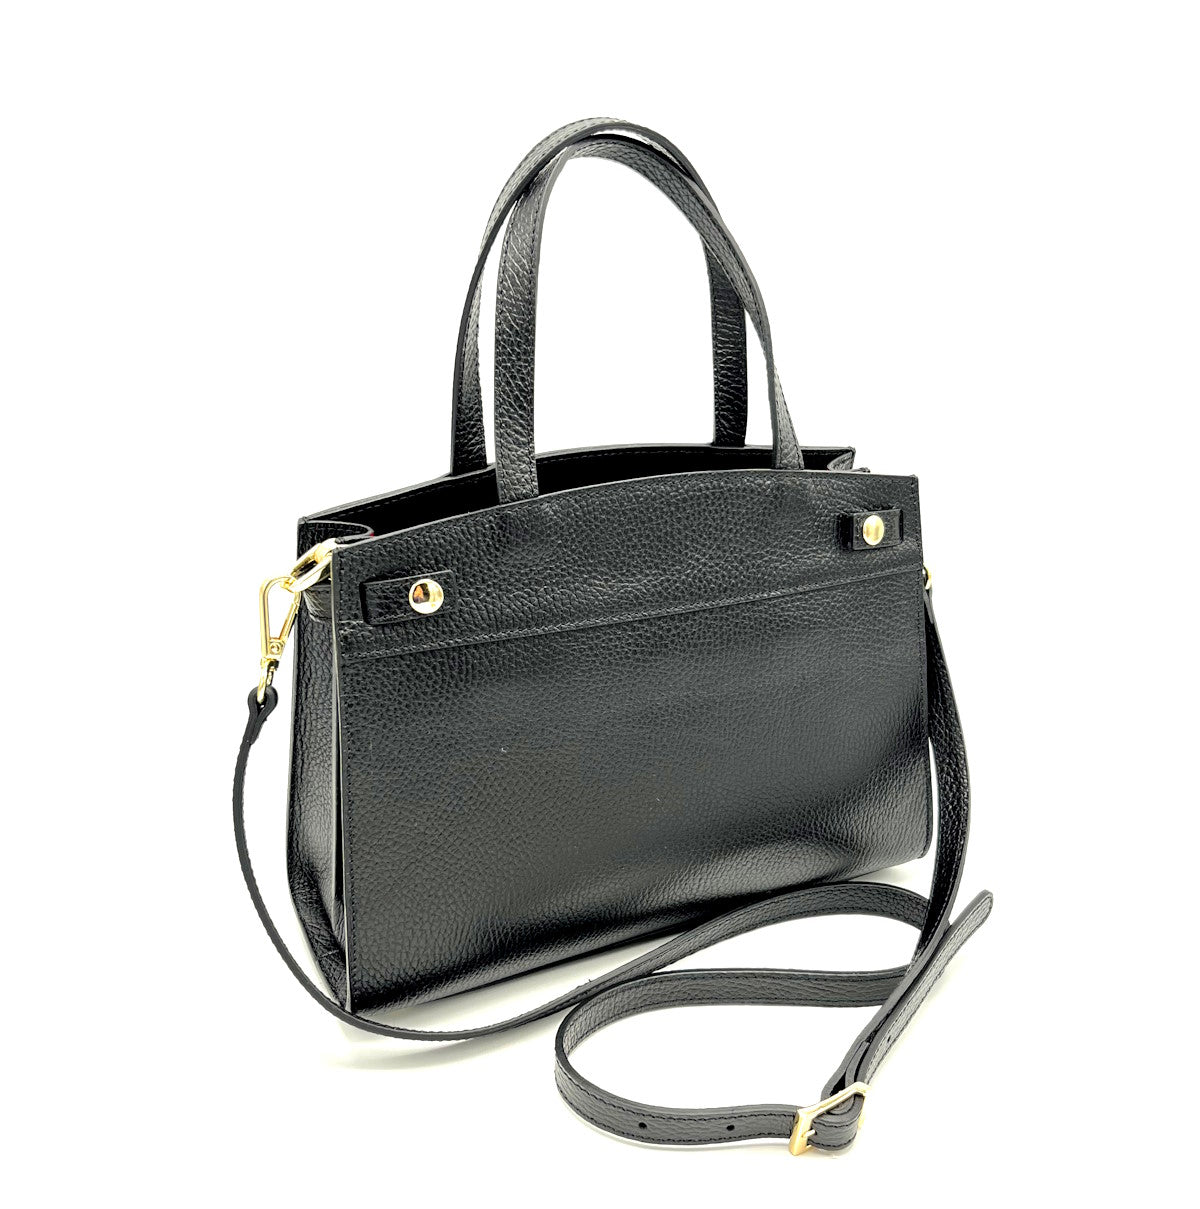 Genuine leather shoulder bag, Made in Italy, art. 112476